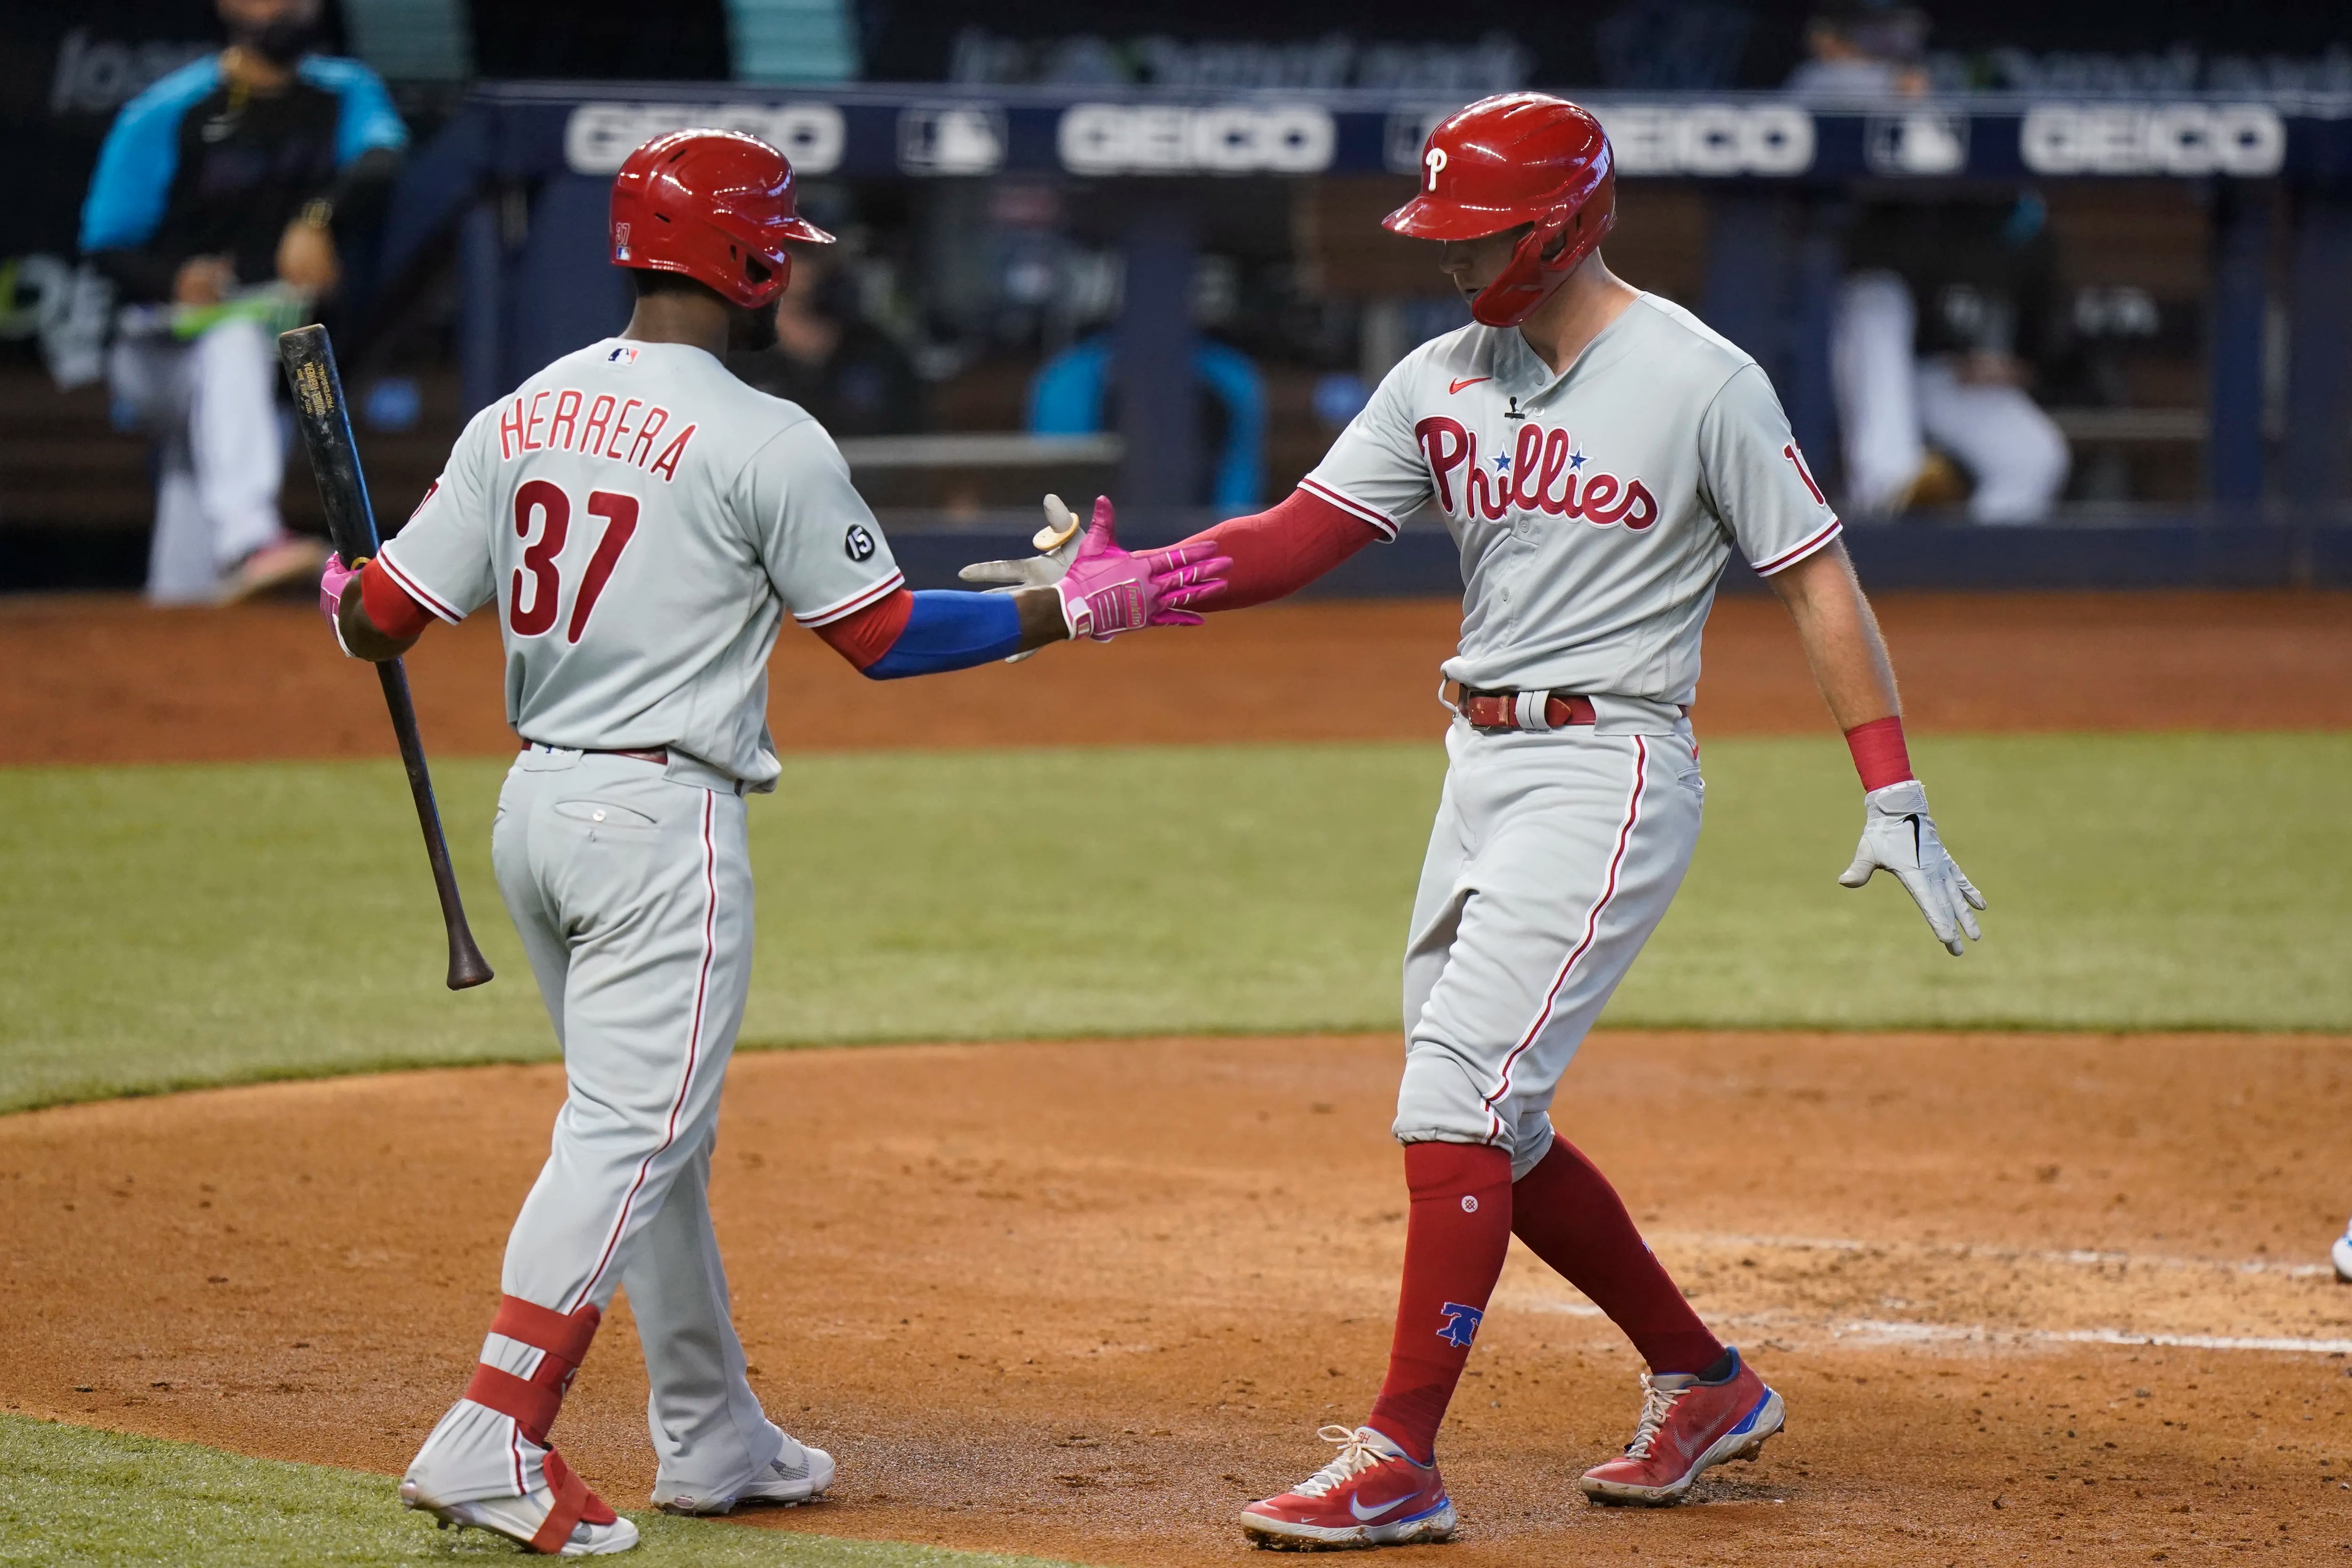 Ranger Suárez will be available out of bullpen for Phillies in NLCS Game 5   Phillies Nation - Your source for Philadelphia Phillies news, opinion,  history, rumors, events, and other fun stuff.